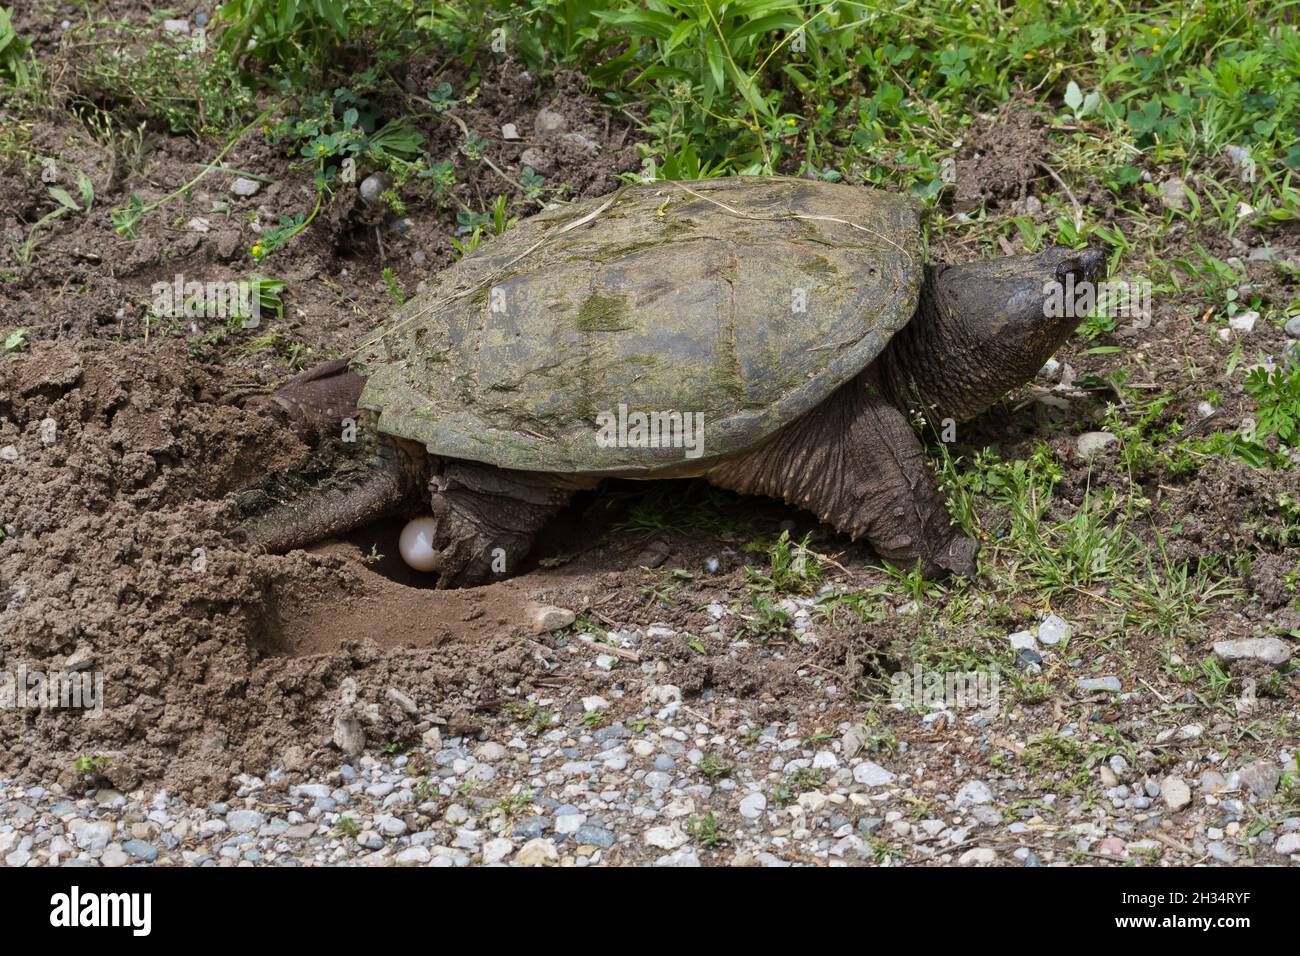 A large snapping turtle laying eggs in a nest at the side of a gravel road. Stock Photo